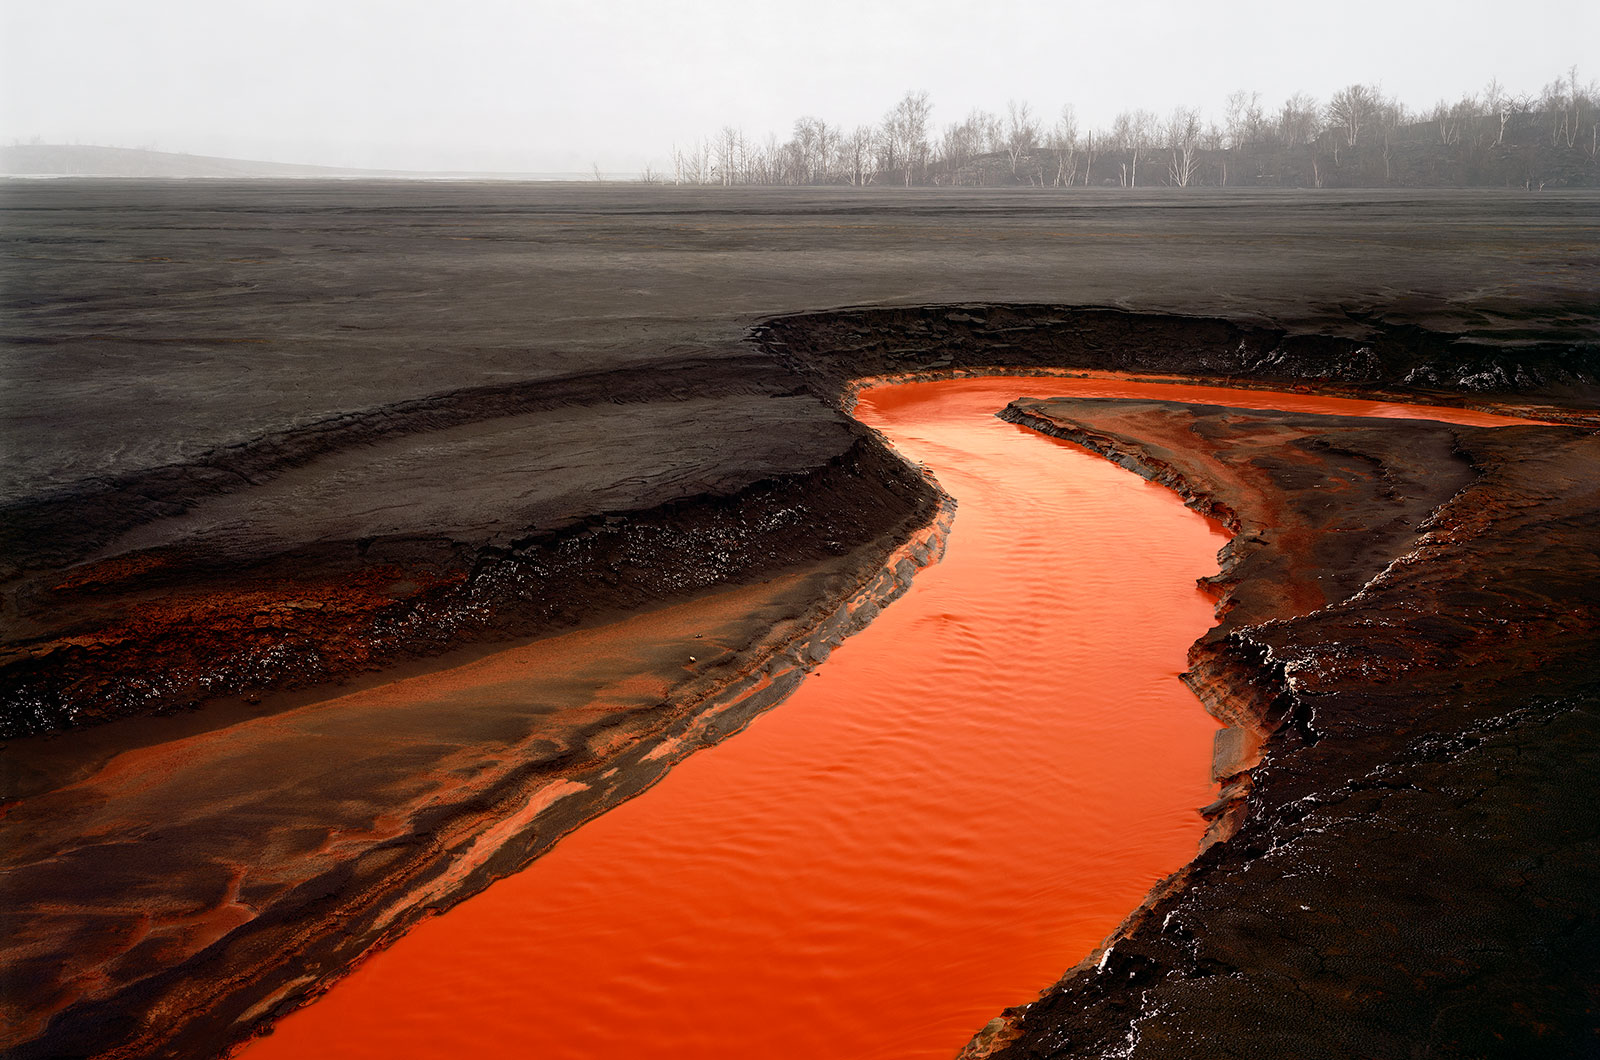 winding scarlet-colored water